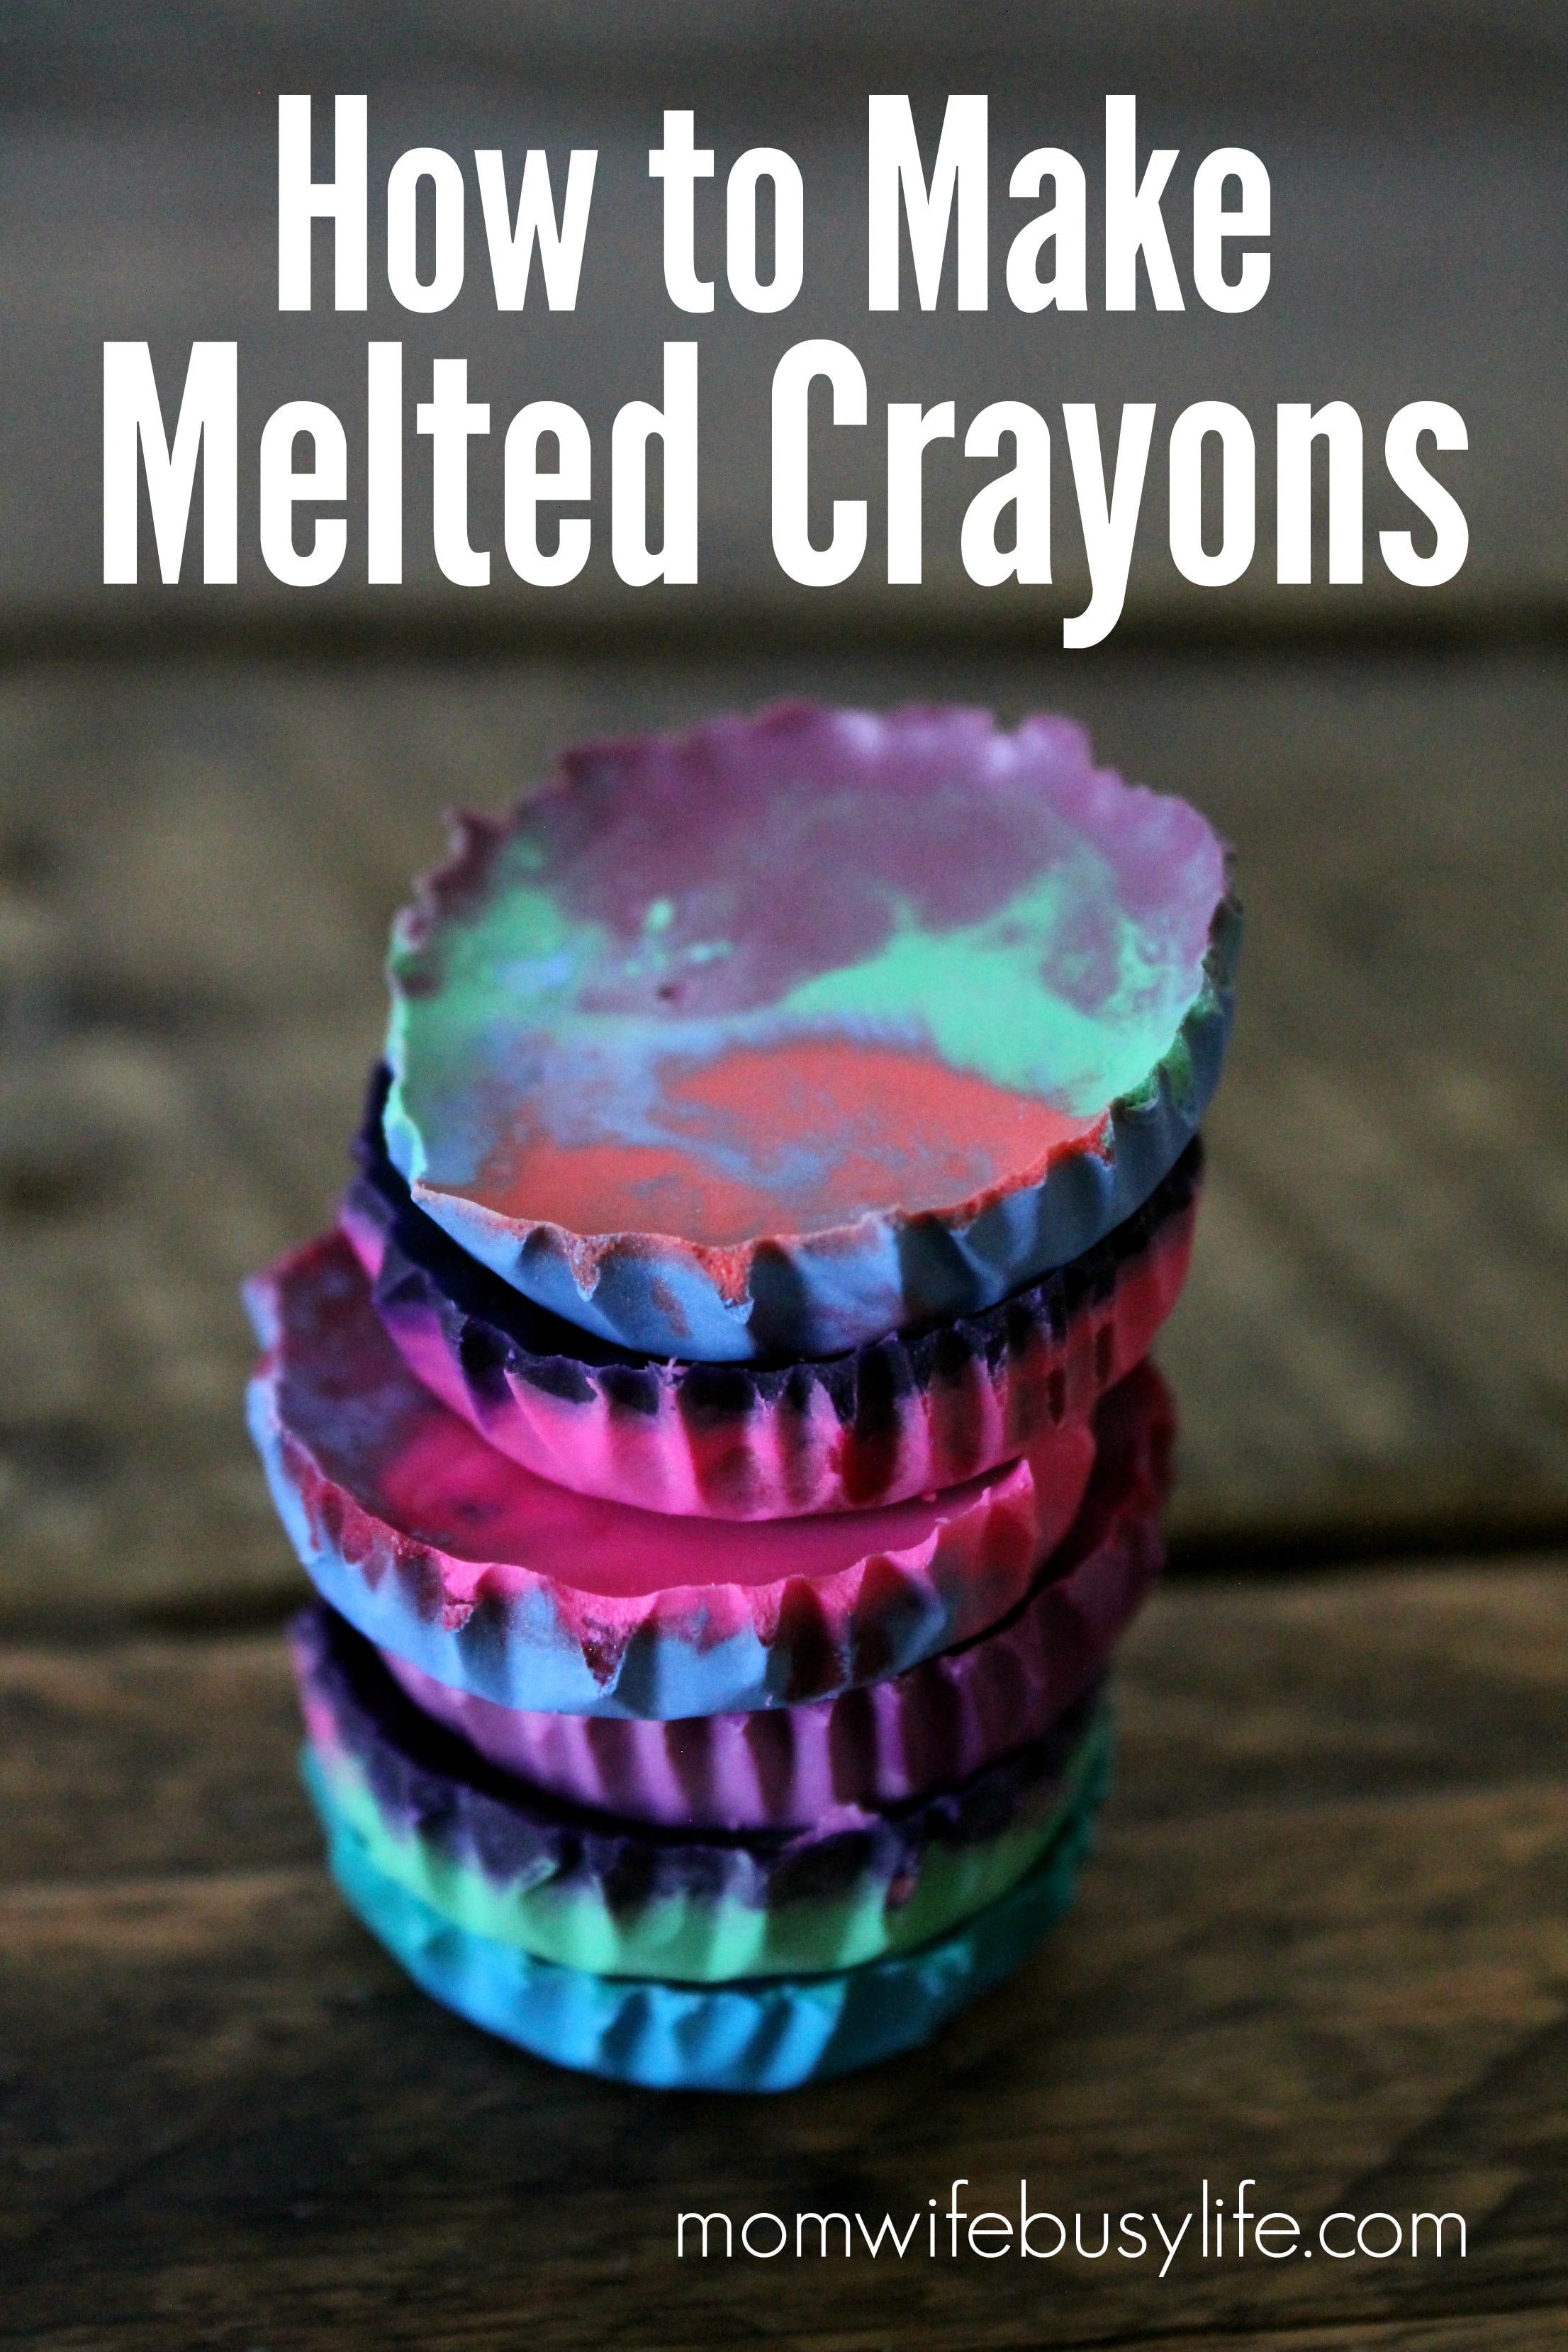 How to Make Melted Crayons - Mom. Wife. Busy Life.